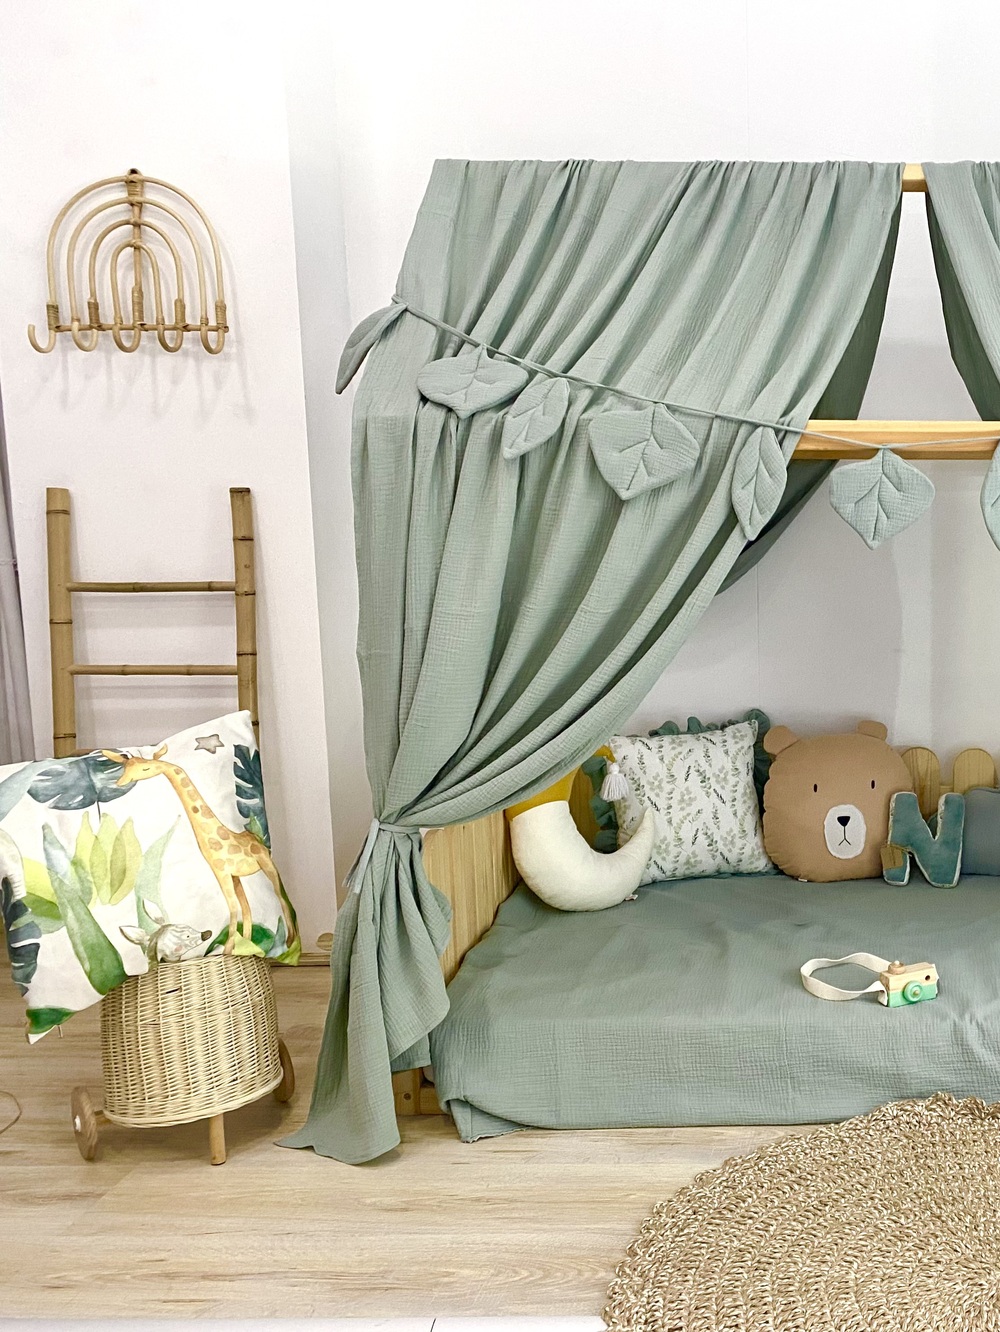 Bed Curtains-Canopy Bed Mint